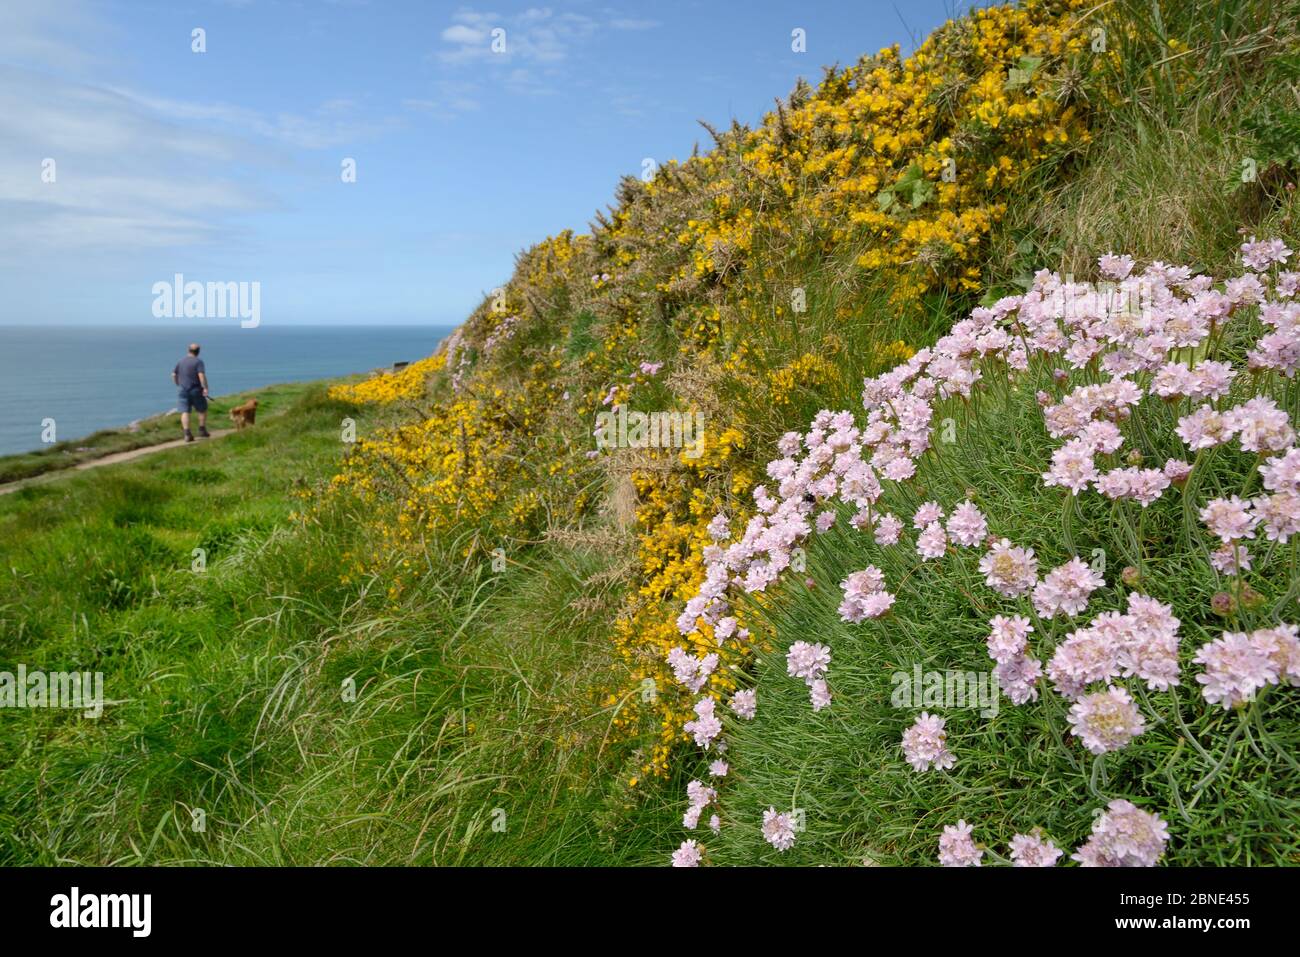 Sea thrift (Armeria maritima) and Common gorse bushes (Ulex europaeus) flowering on an old wall beside a clifftop path with a man walking a dog, Widem Stock Photo